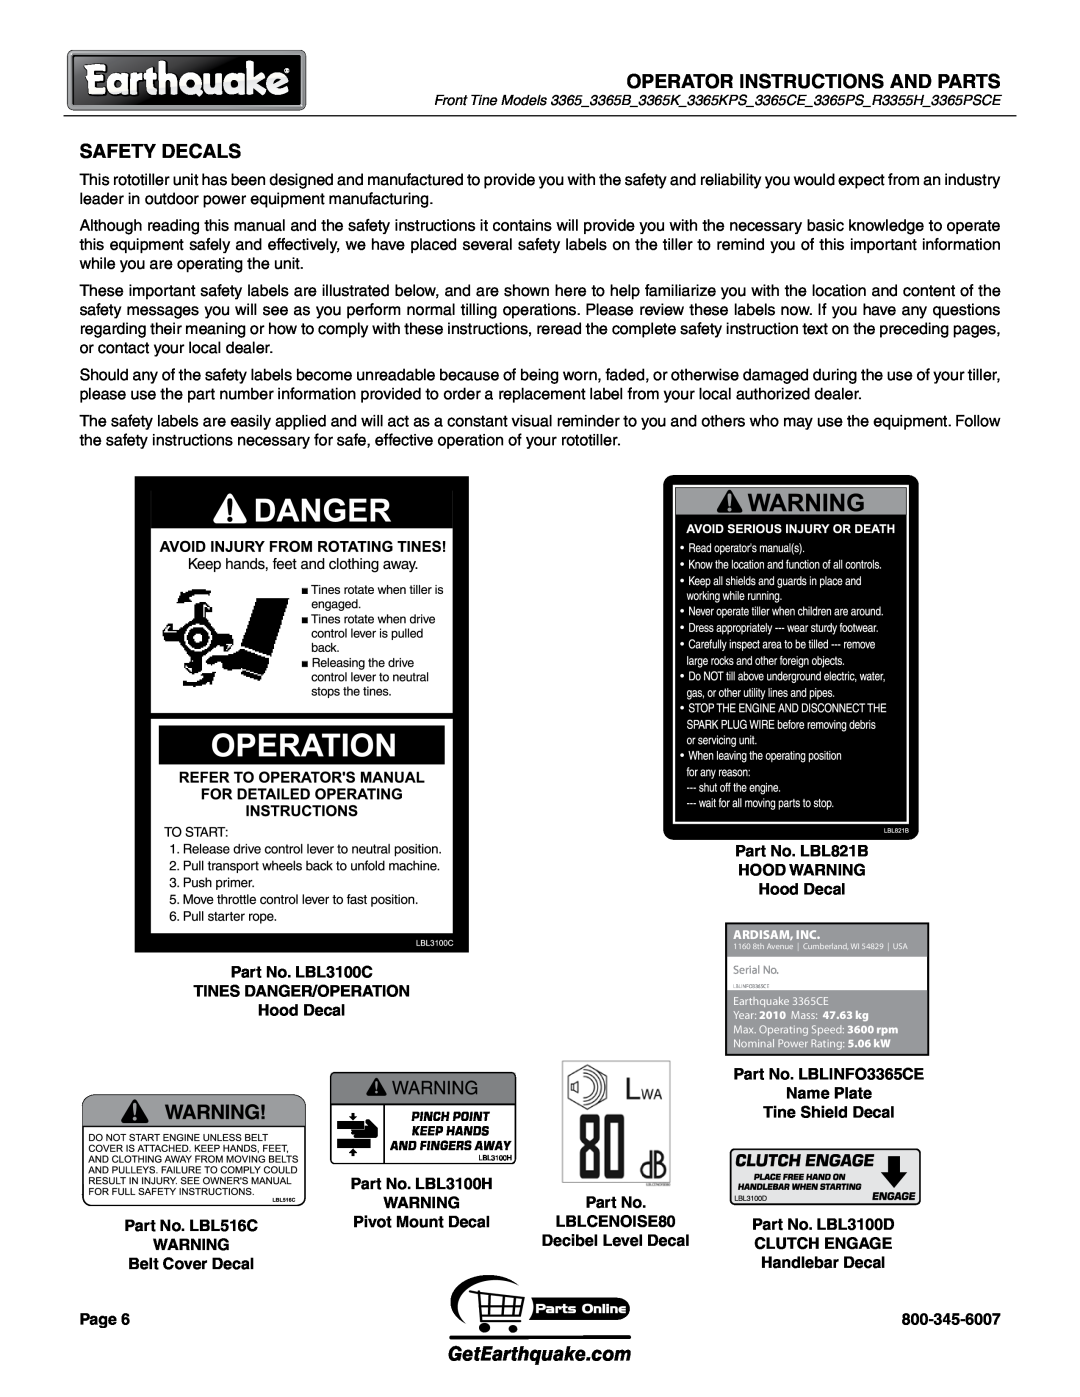 EarthQuake 3365 Safety Decals, OPERATor INSTRUCTIONS and parts, GetEarthquake.com, Ardisam, Inc, Year 2010 Mass 47.63 kg 